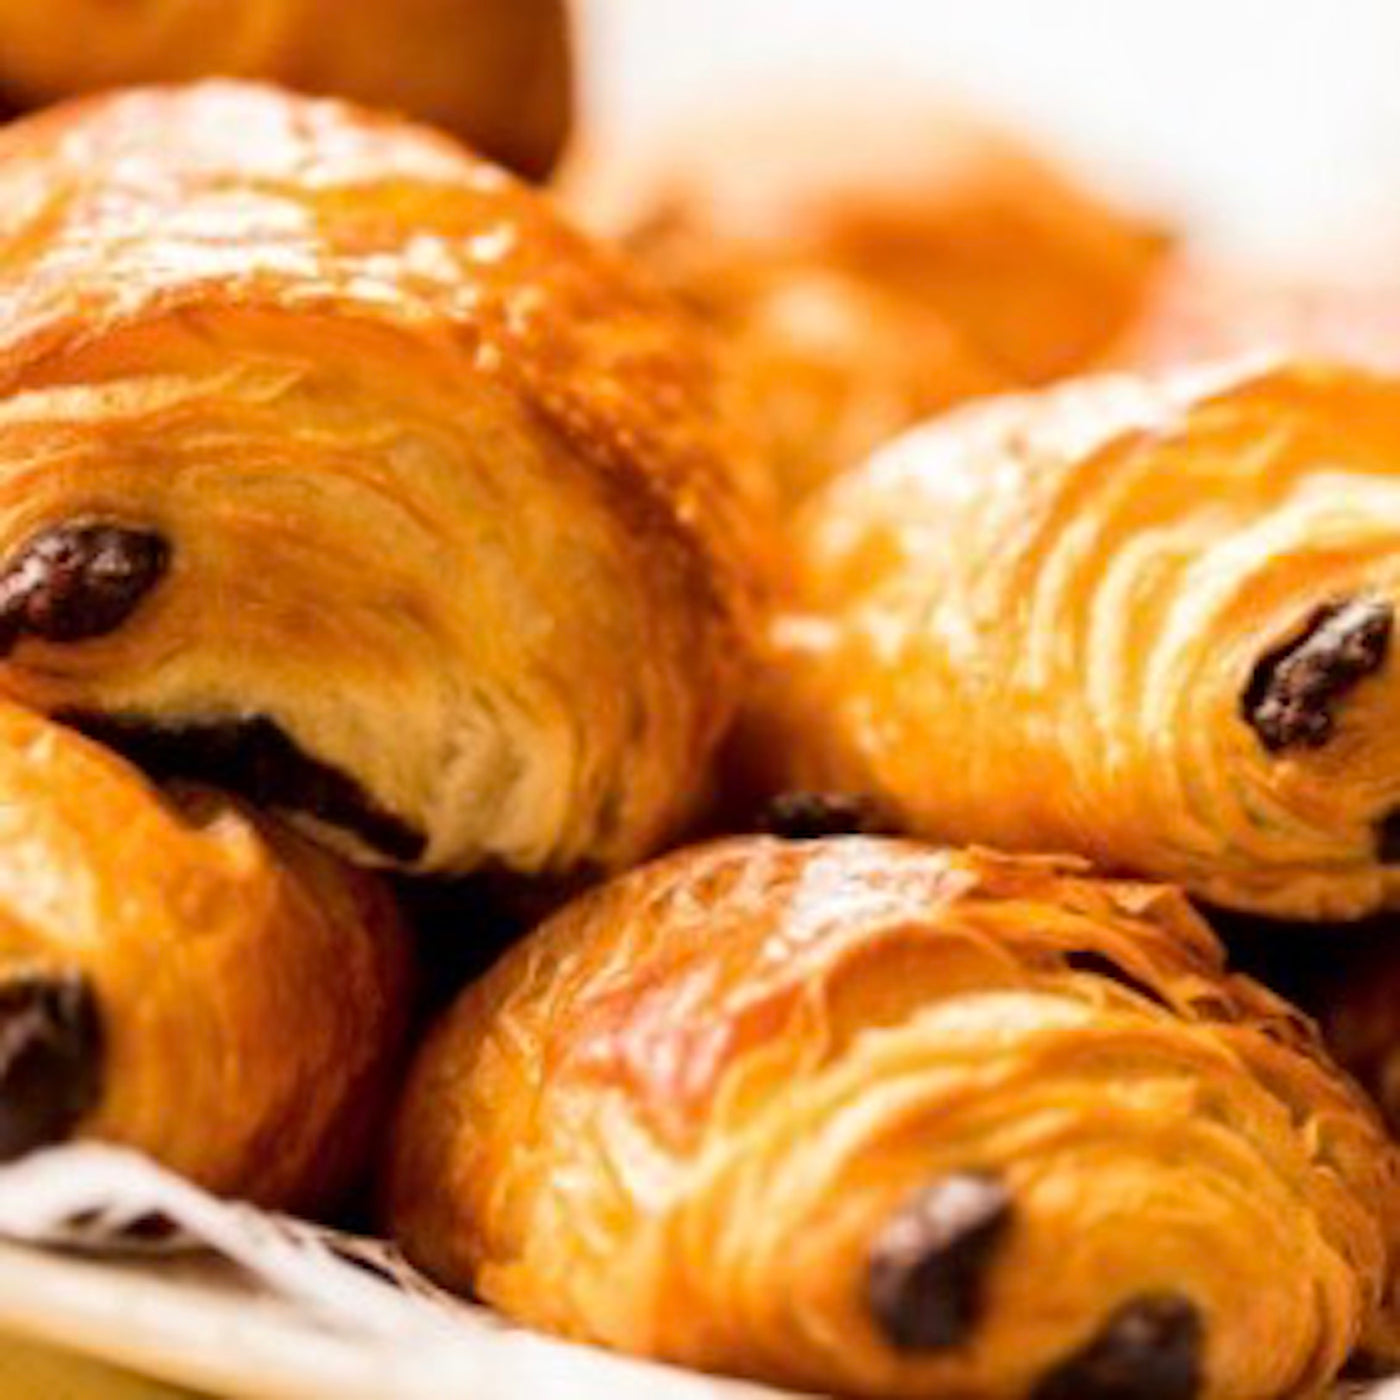 Shop Chocolate croissant, Pastries & Breads in Singapore - The New Grocer